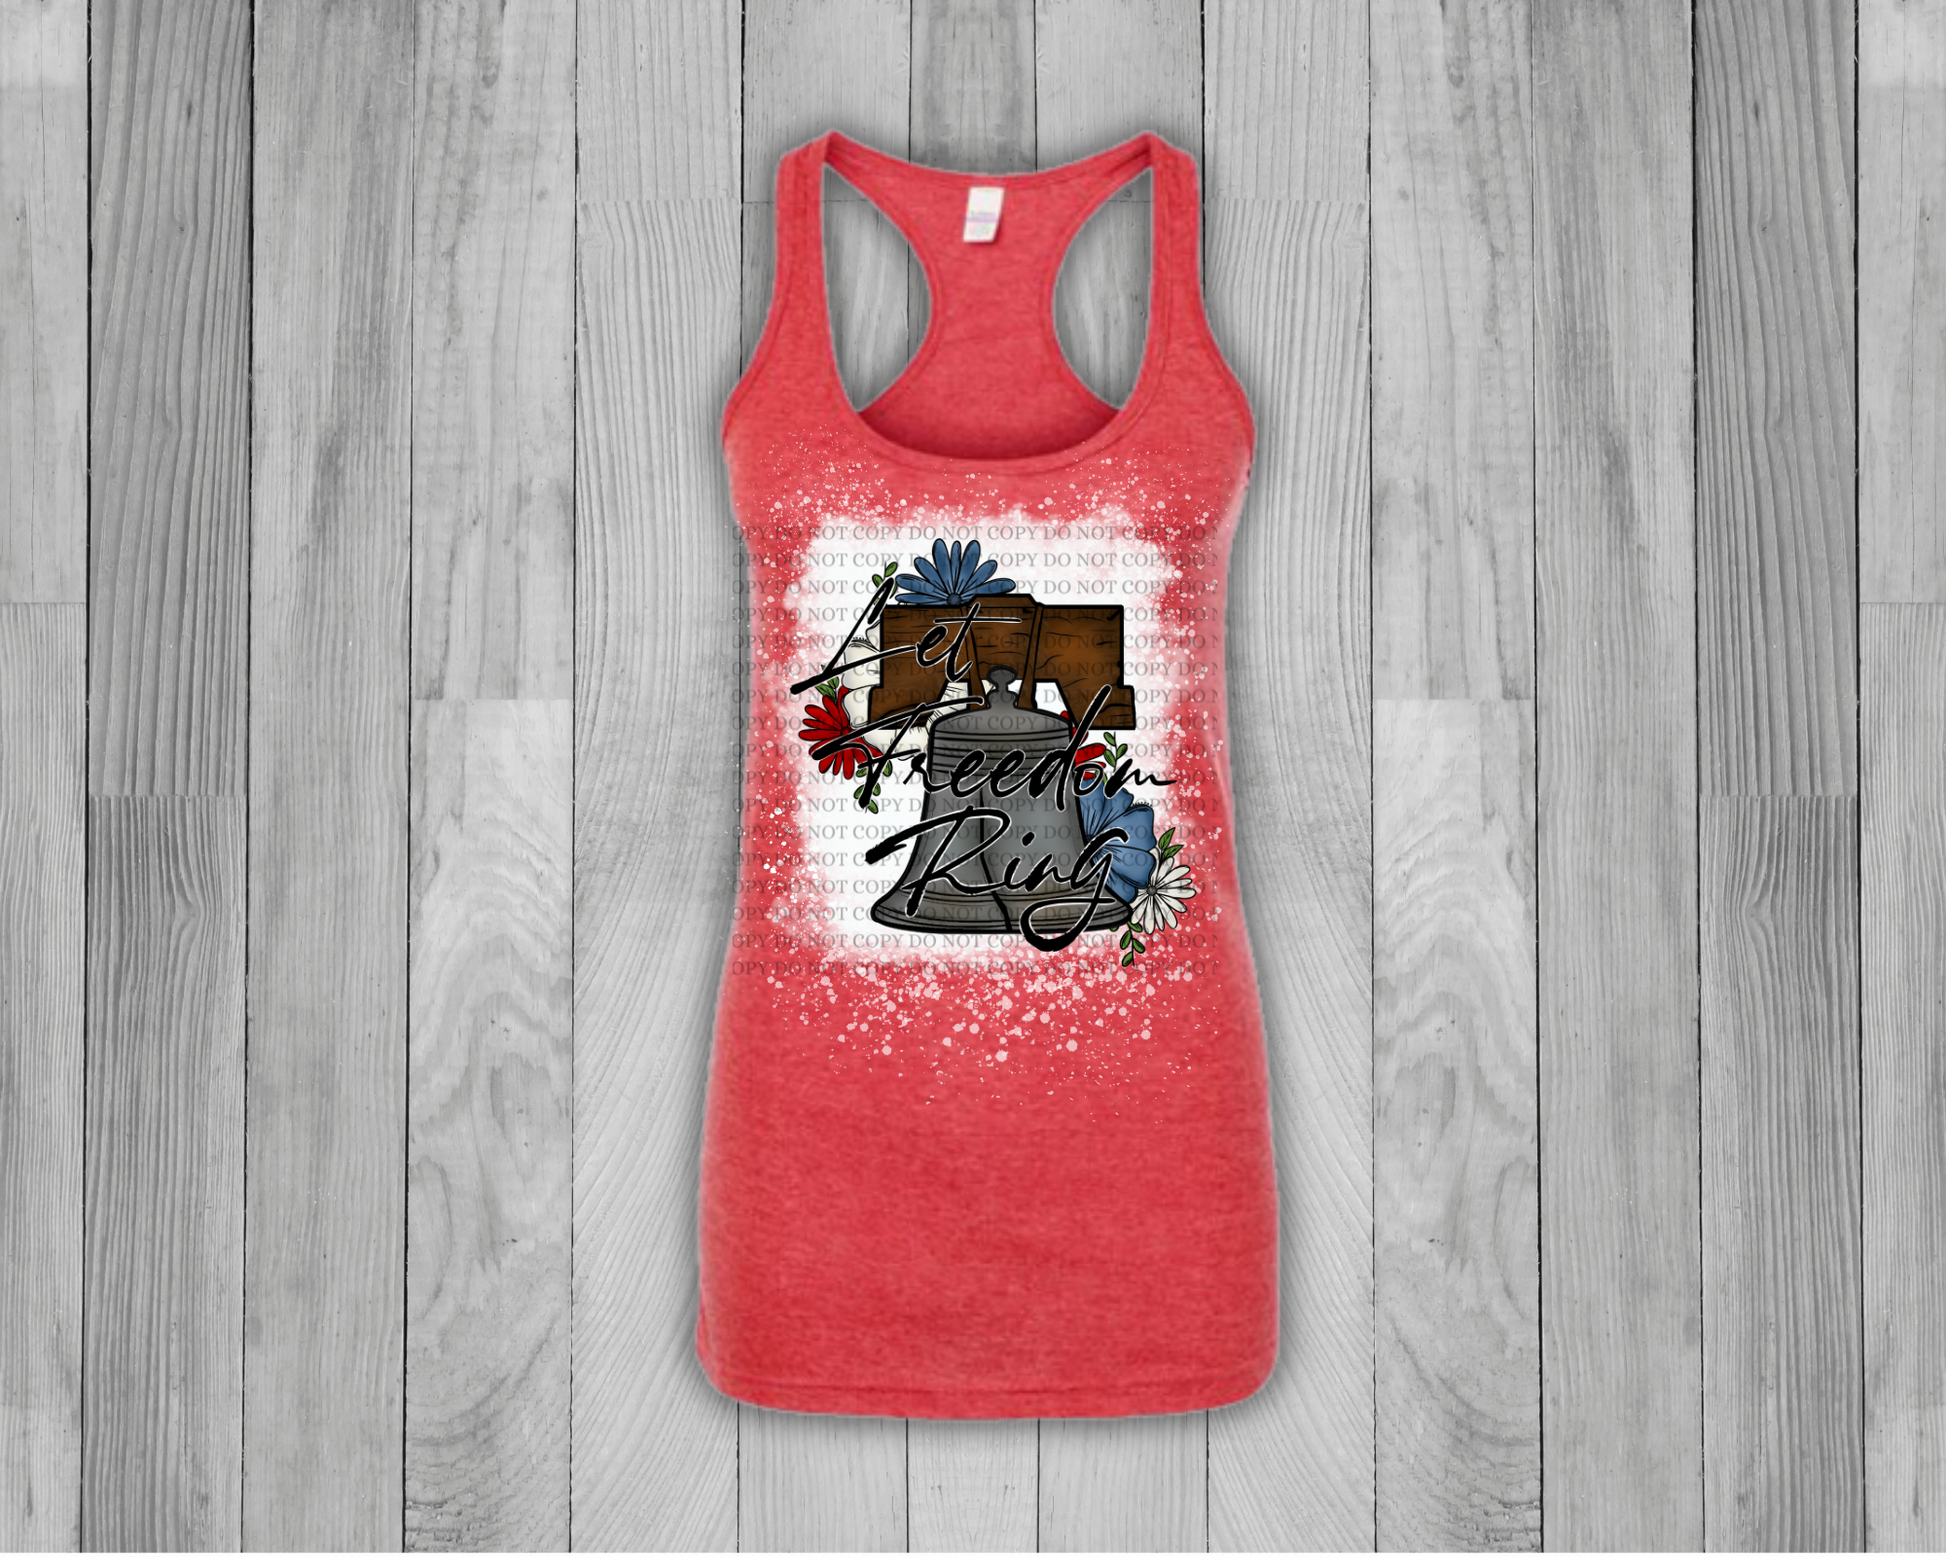 Let Freedom Ring Bleached Tank Top - Mayan Sub Shop